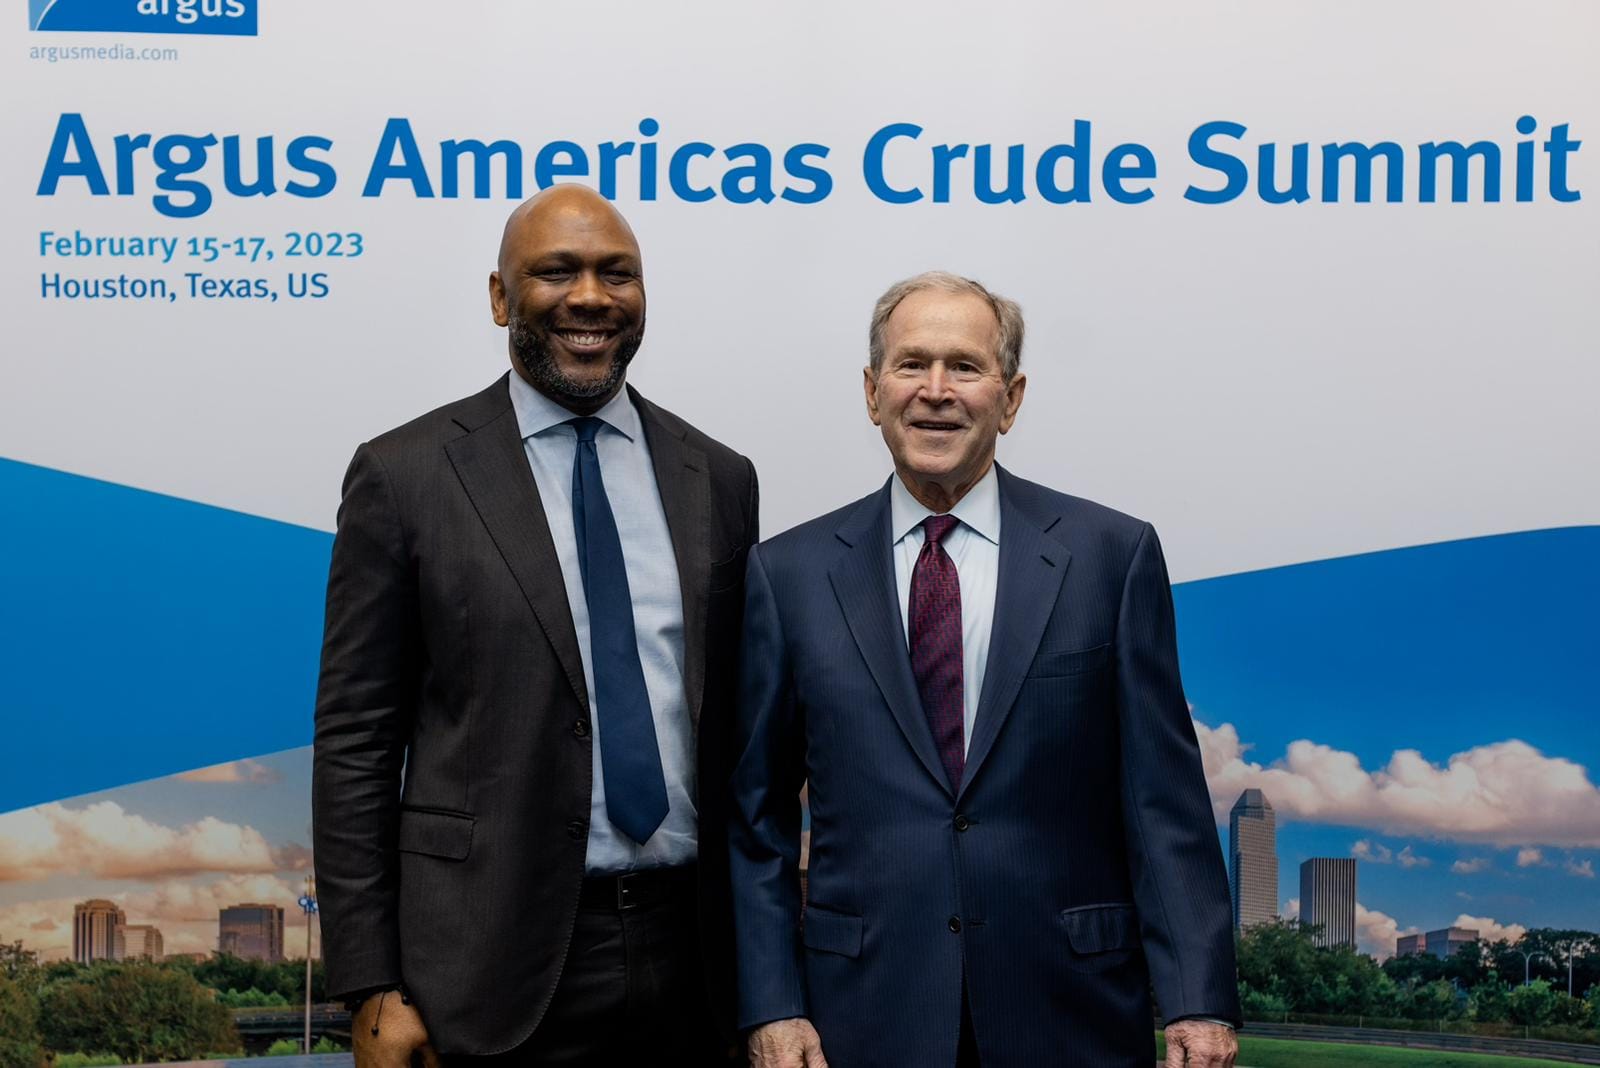 Former Us President George W. Bush Joined The Opening Session At The Annual Argus Americas Crude Summit In Houston